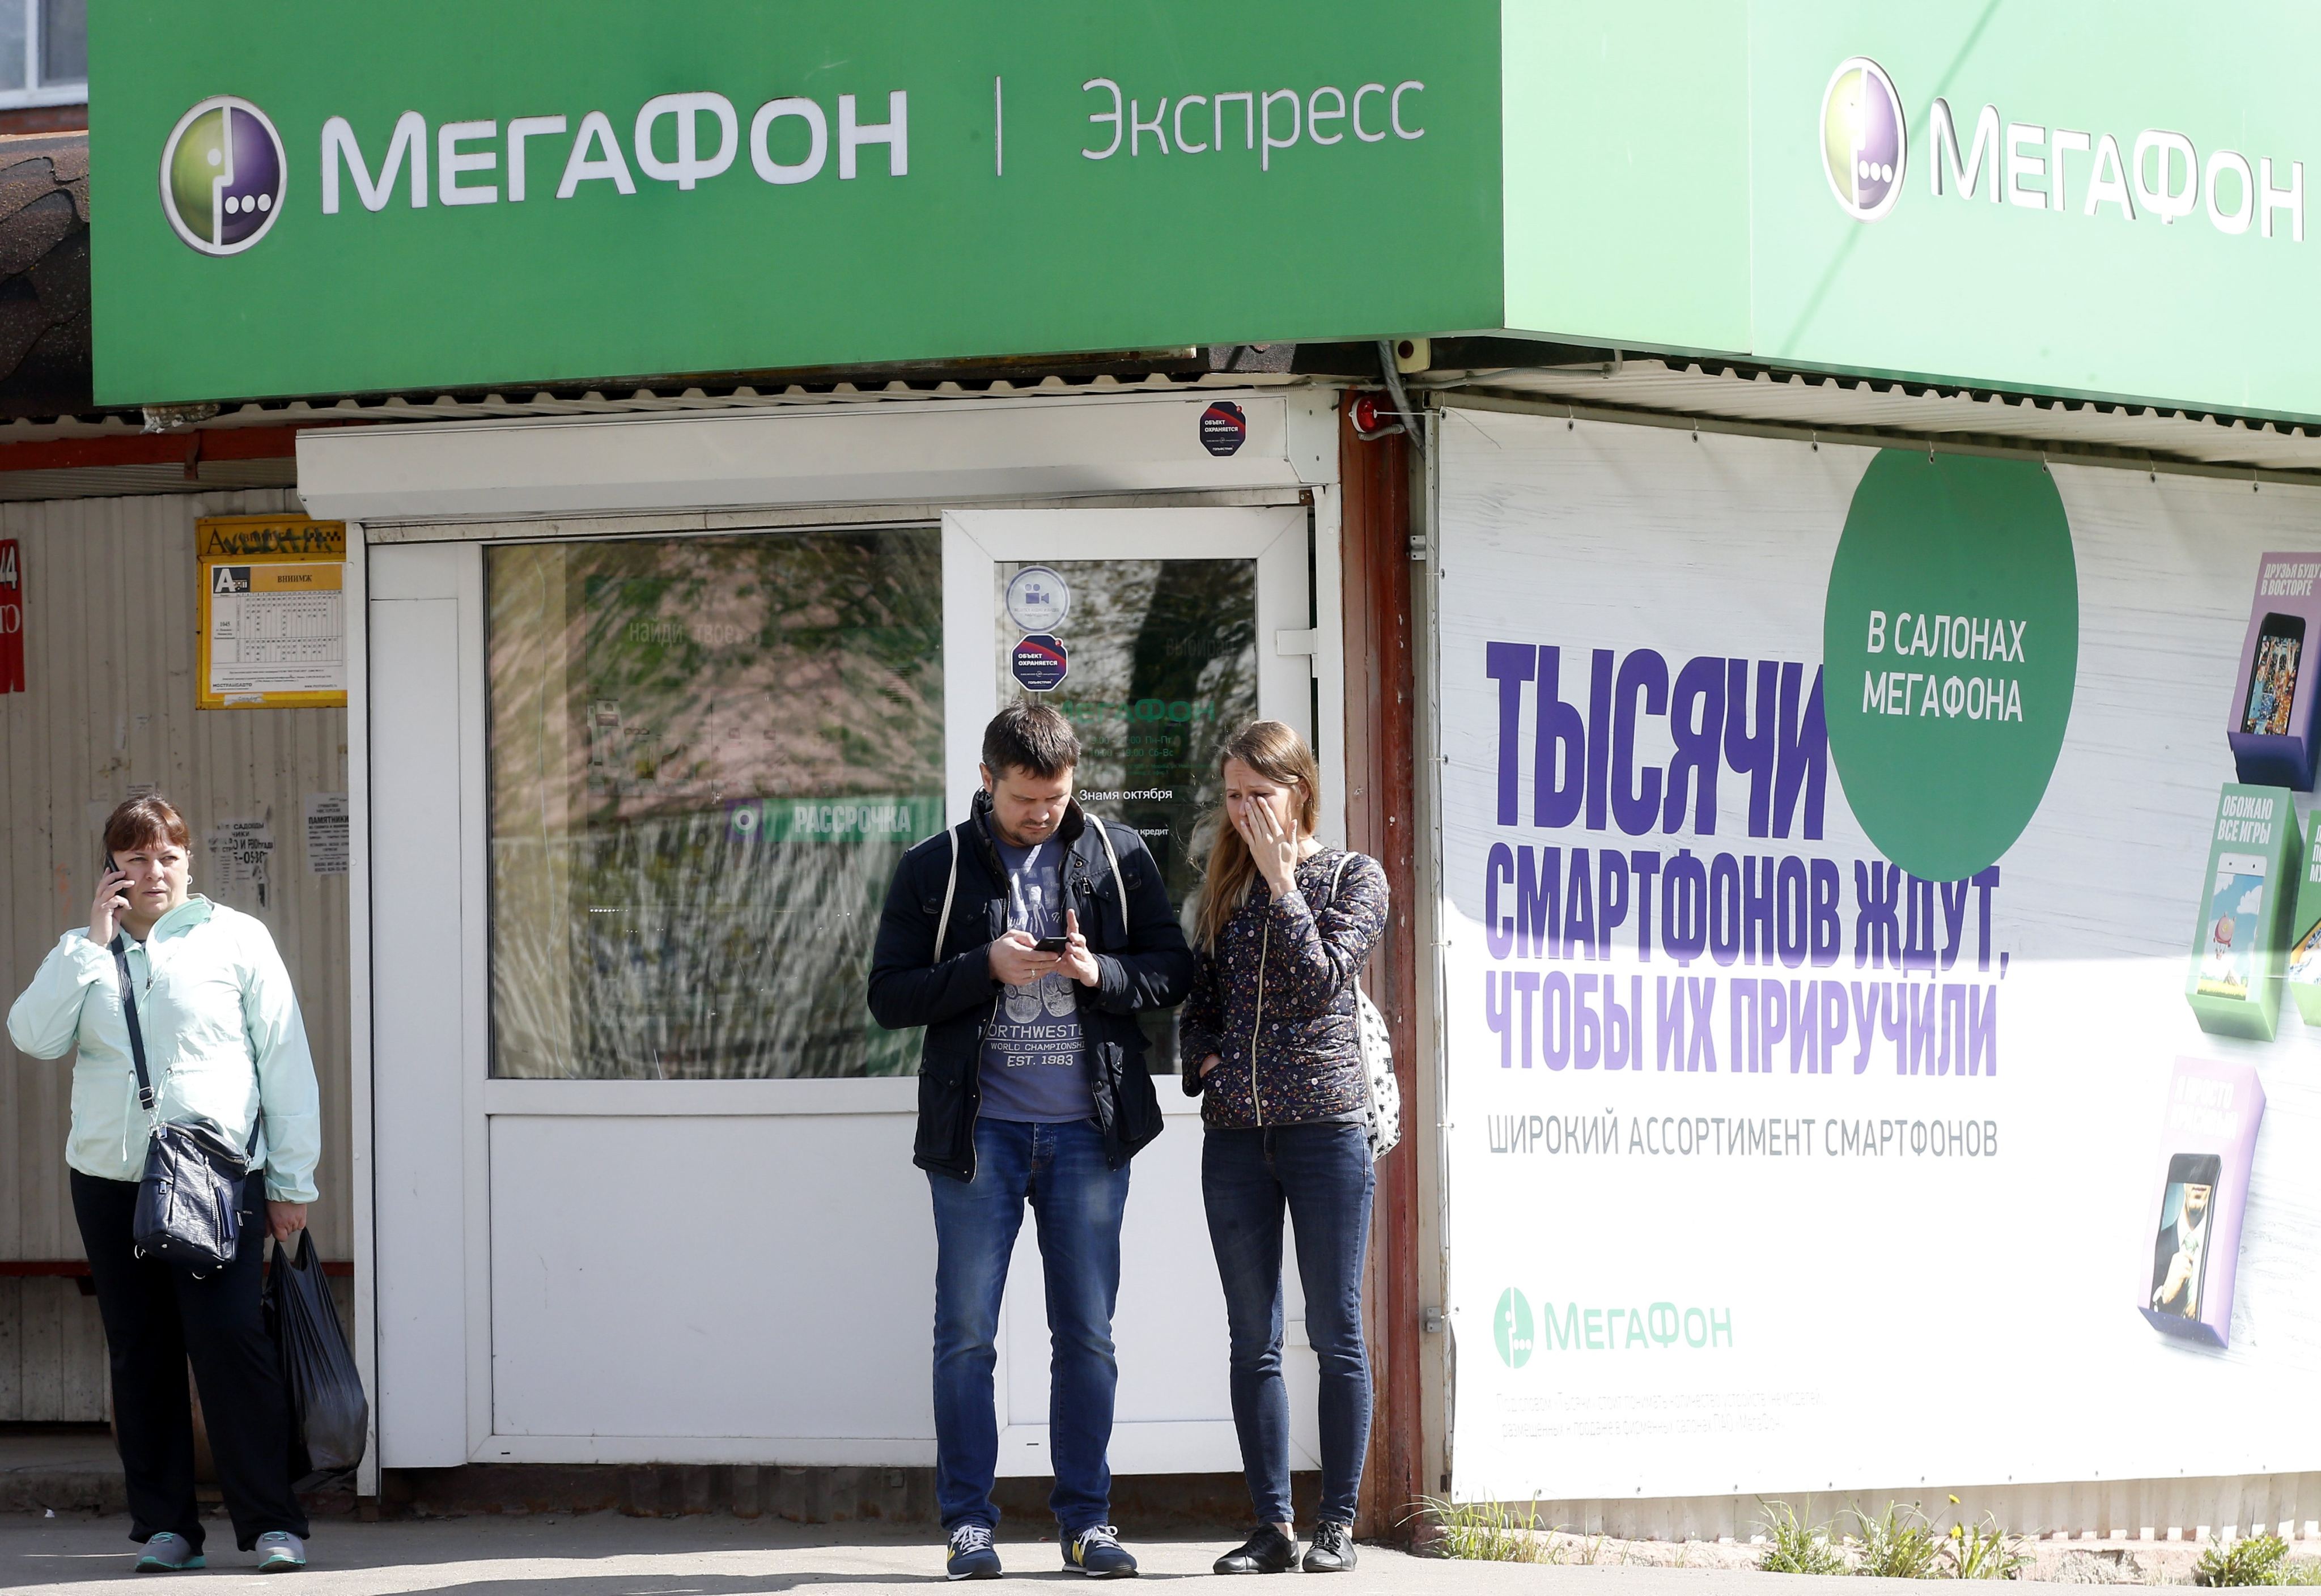 Megafon, one of Russia’s biggest telecoms operators, is included in the latest sanctions, which stopped short of targeting telecoms infrastructure until now. Photo: EPA